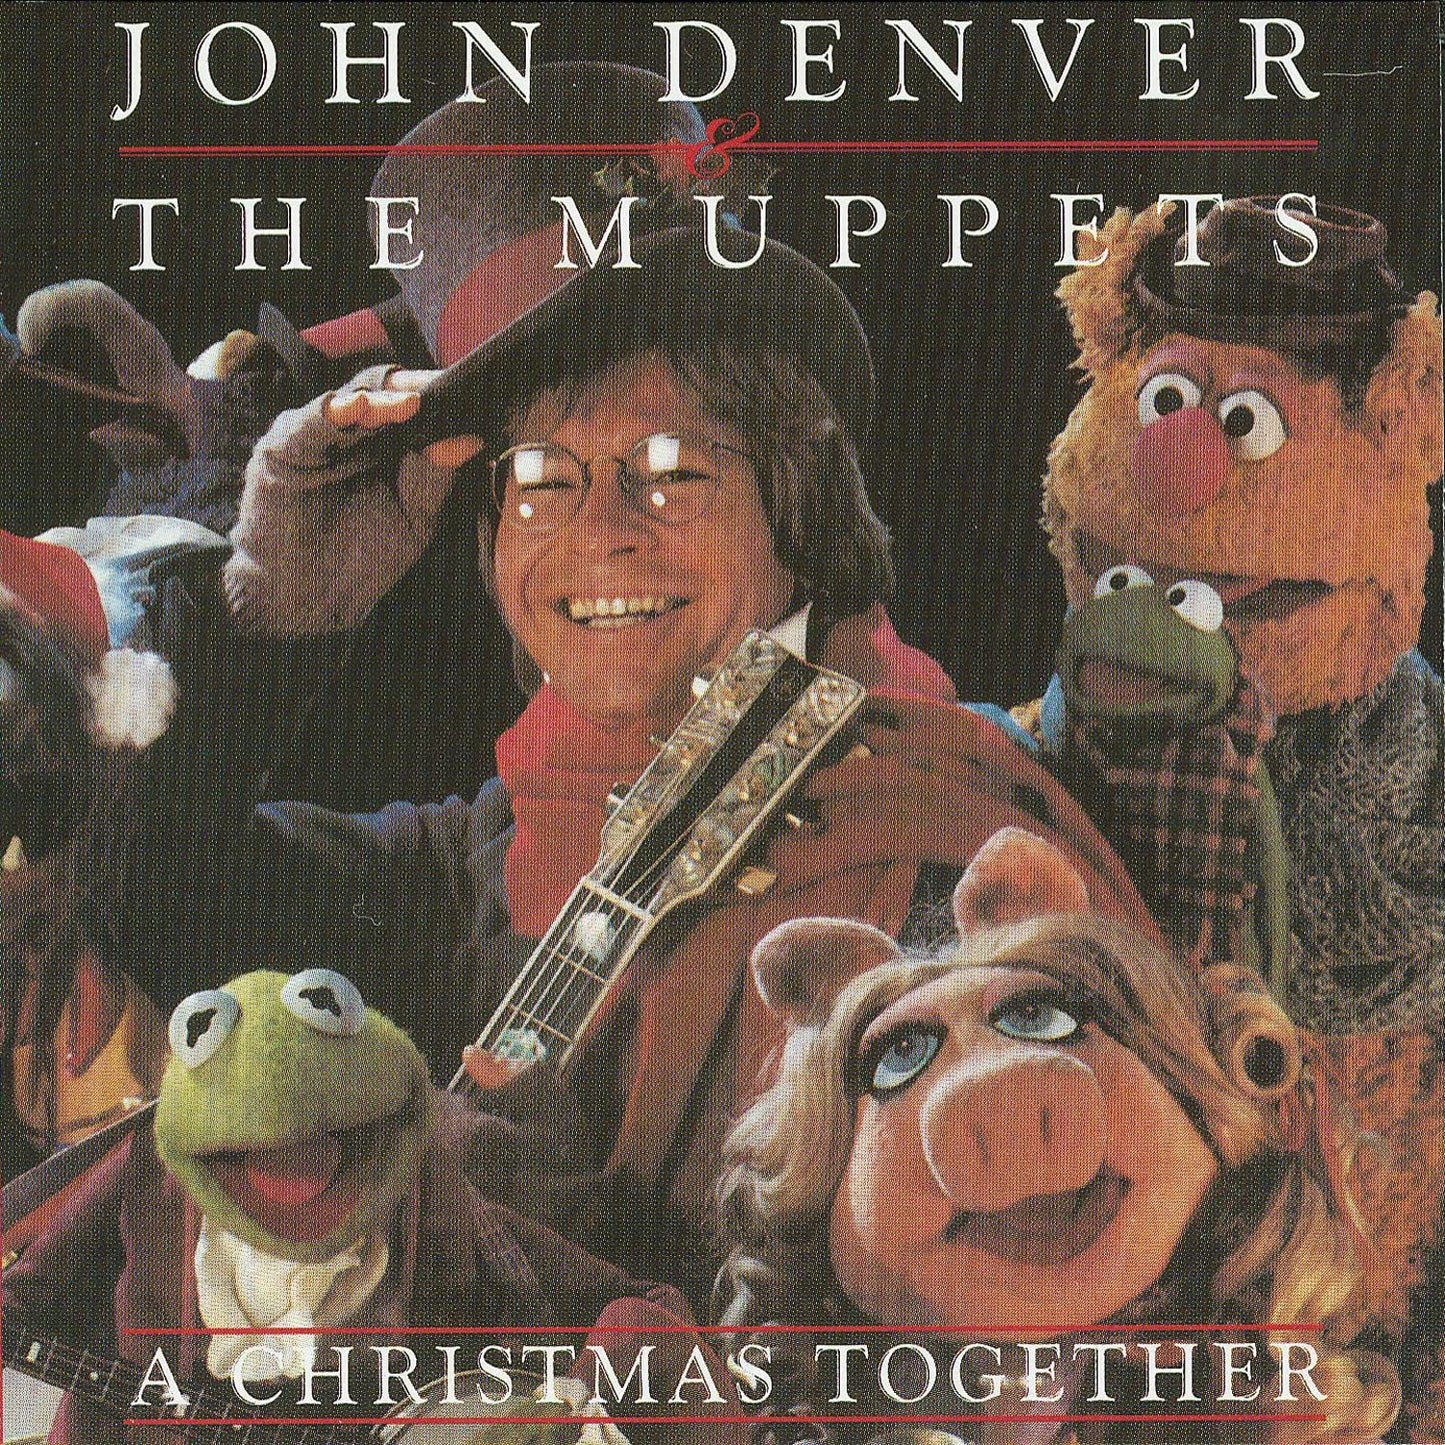 Denver, John And The Muppets/A Christmas Together (Candy Cane Swirl Coloured) [LP]